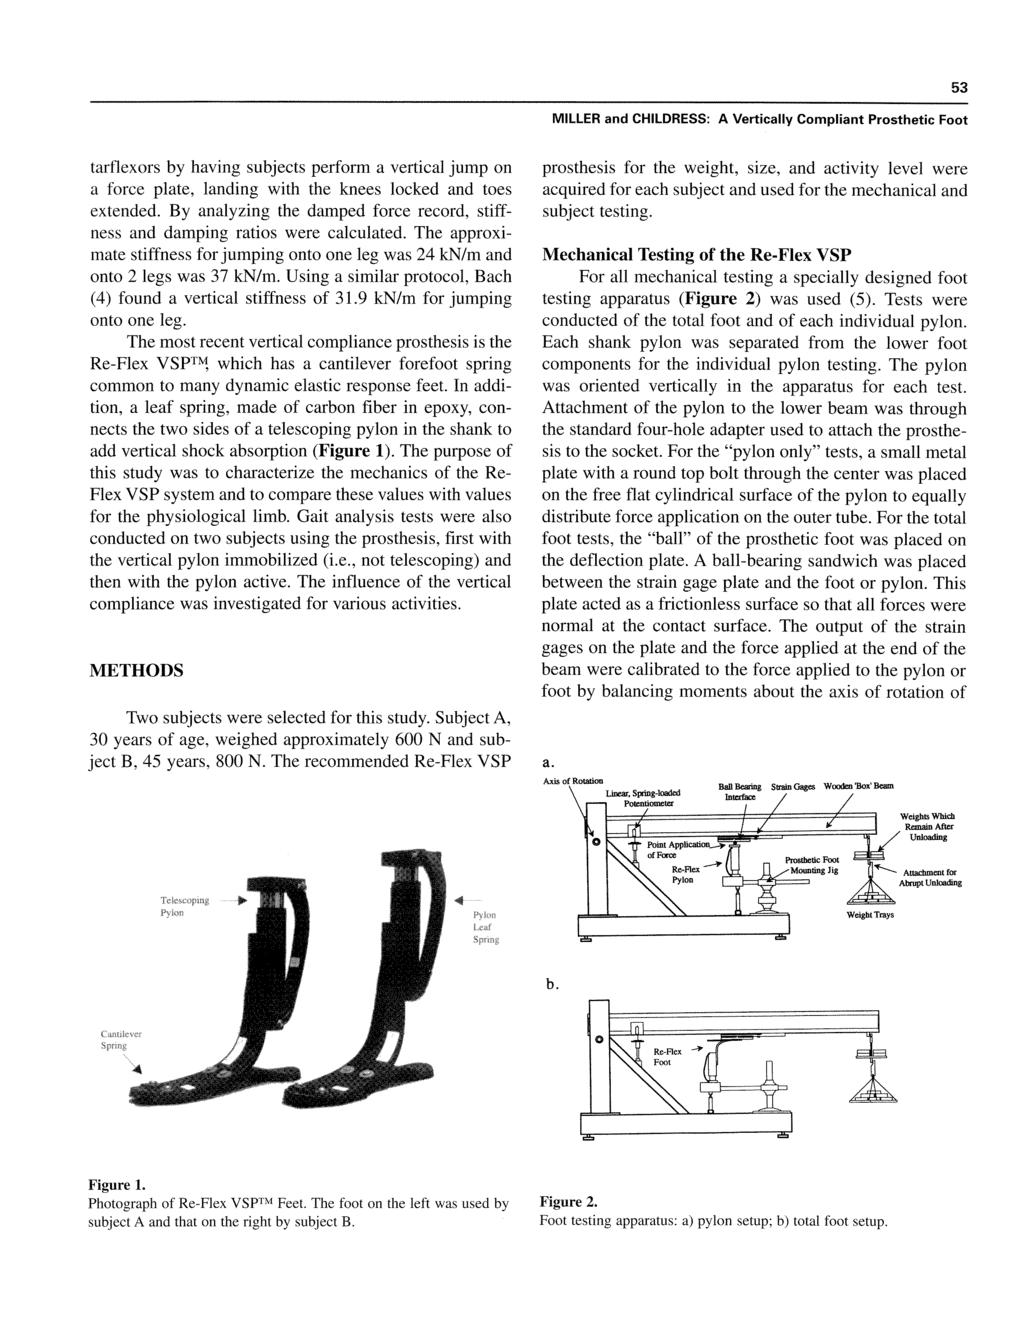 MILLER and CHILDRESS : A Vertically Compliant Prosthetic Foot 53 tarflexors by having subjects perform a vertical jump on a force plate, landing with the knees locked and toes extended.